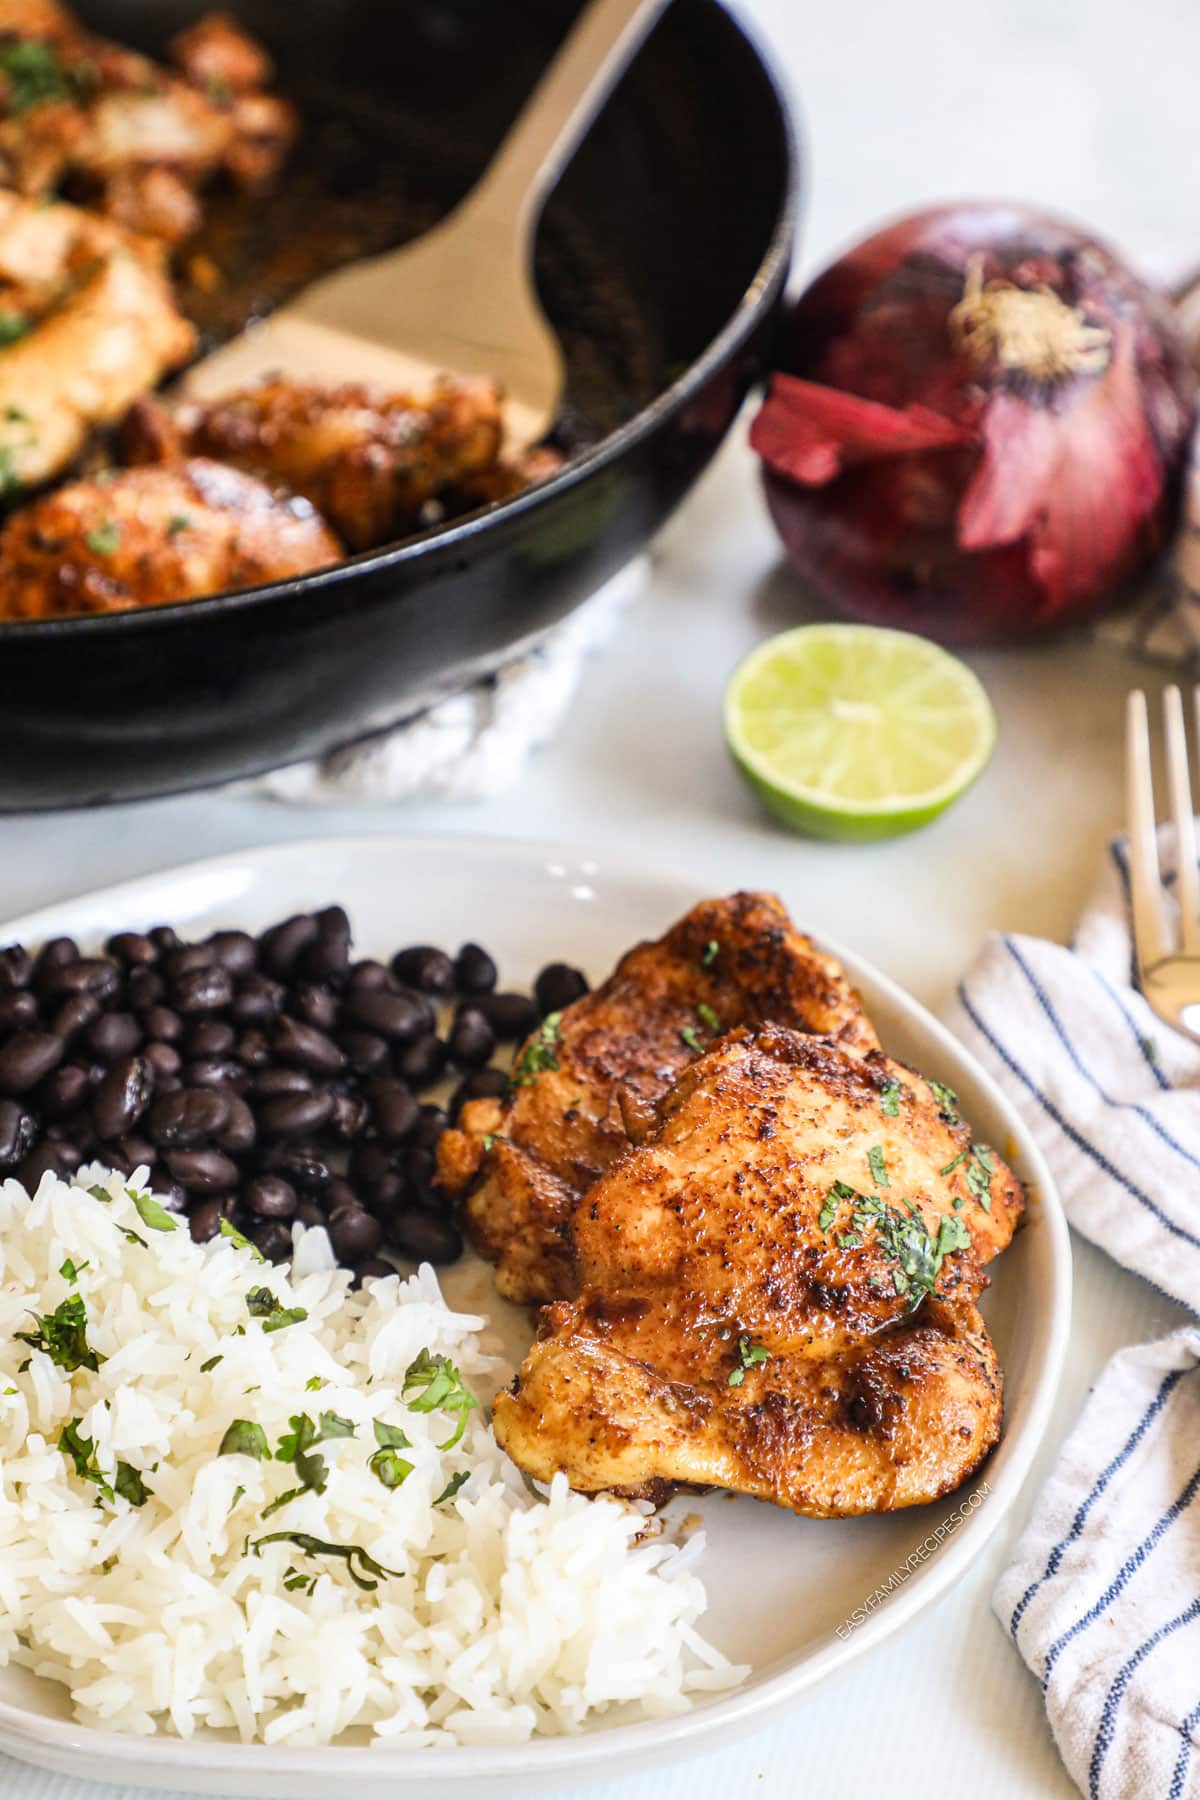 Plate with rice, beans, and Mexican style chicken thighs